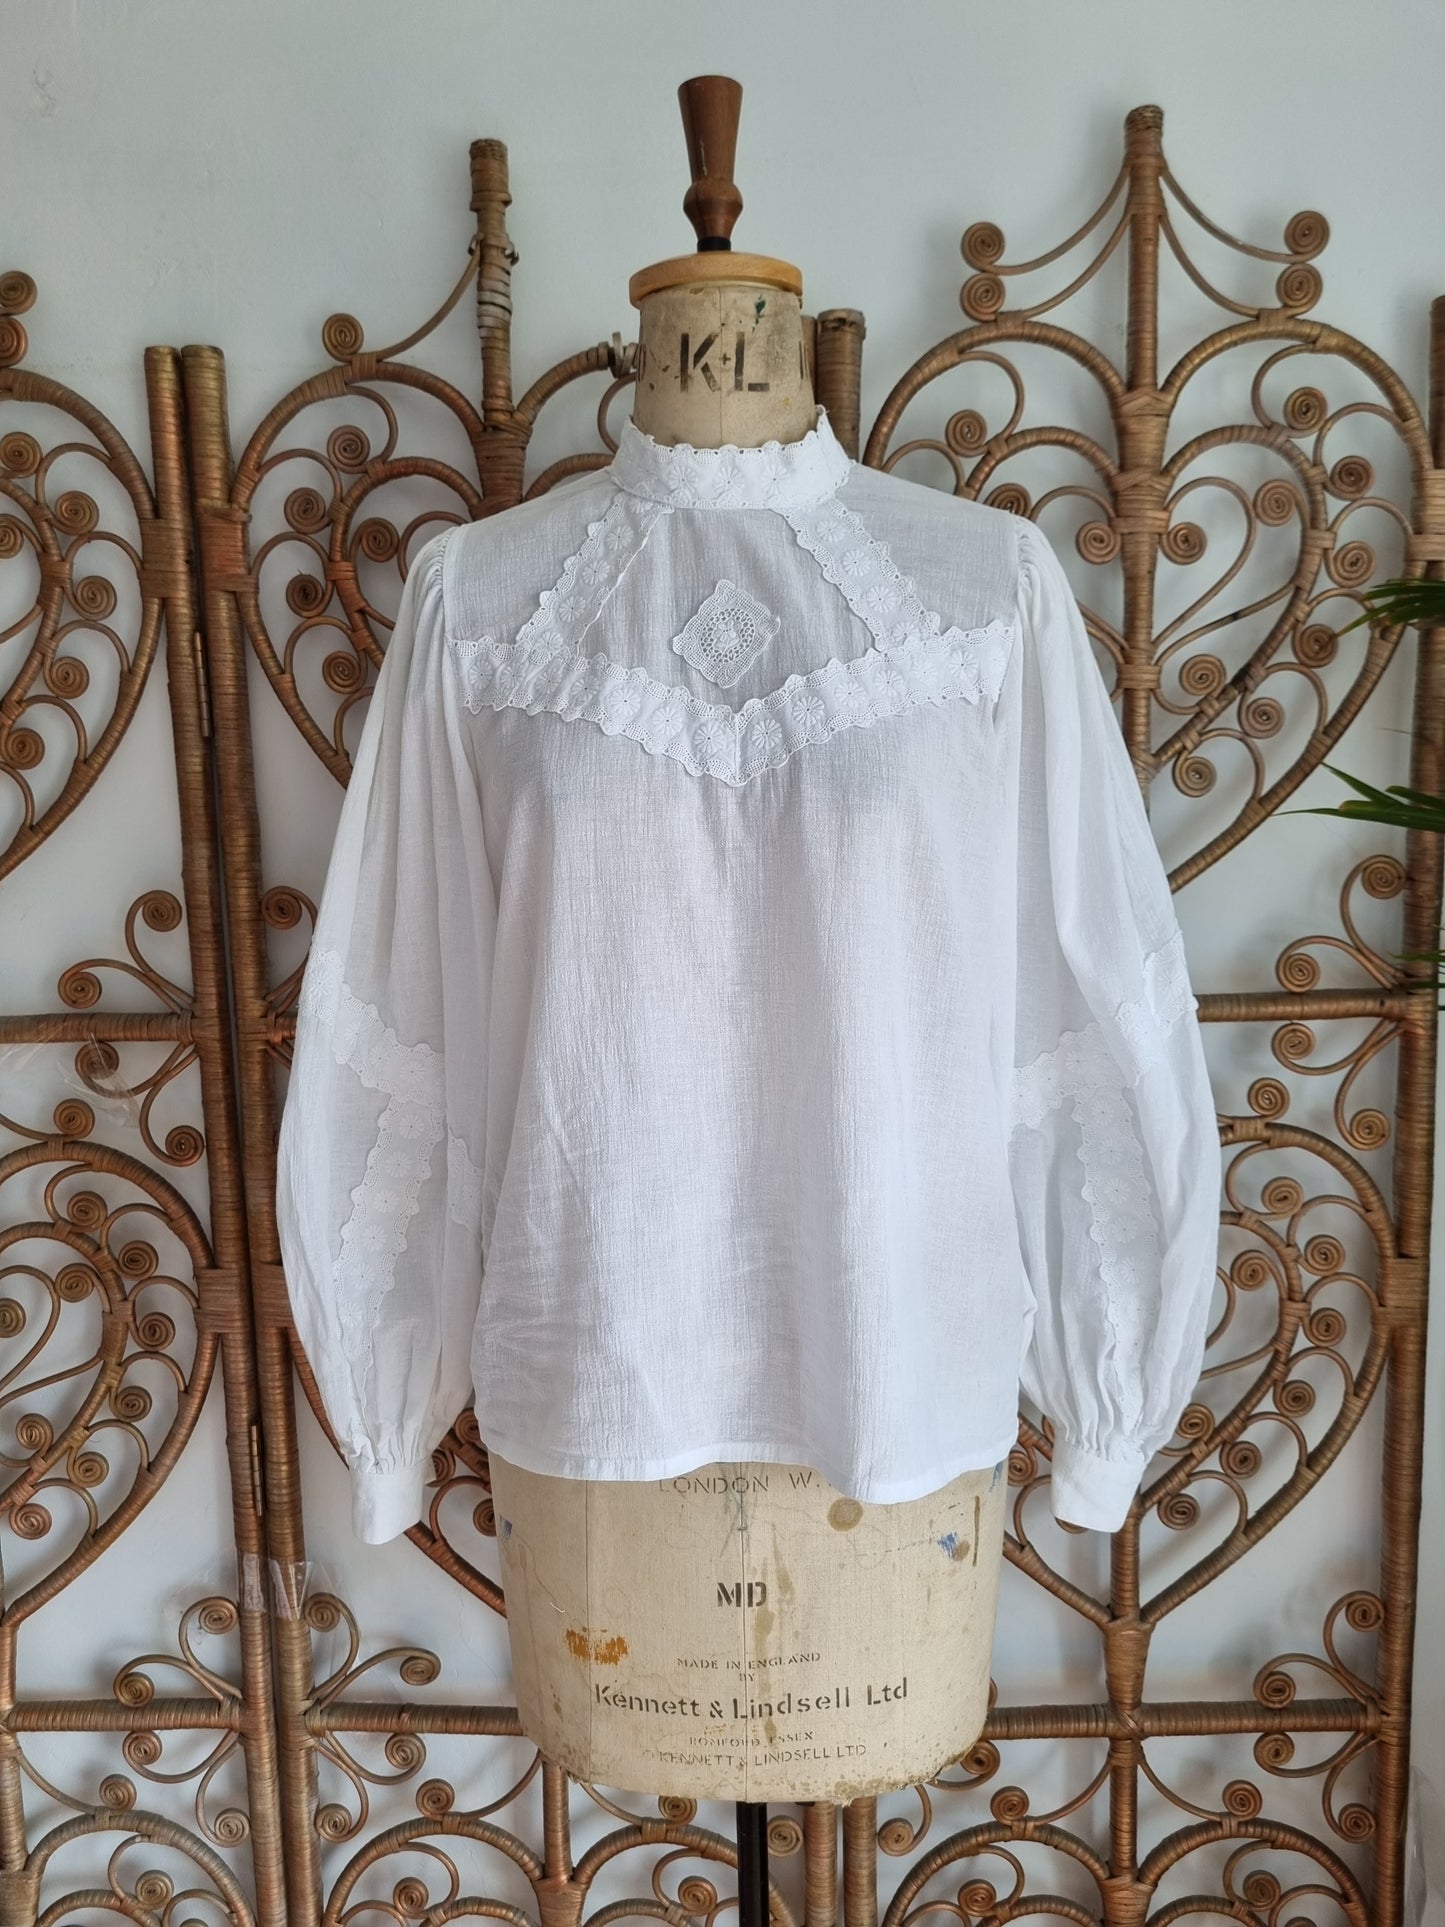 Vintage embroidery anglaise cheesecloth blouse